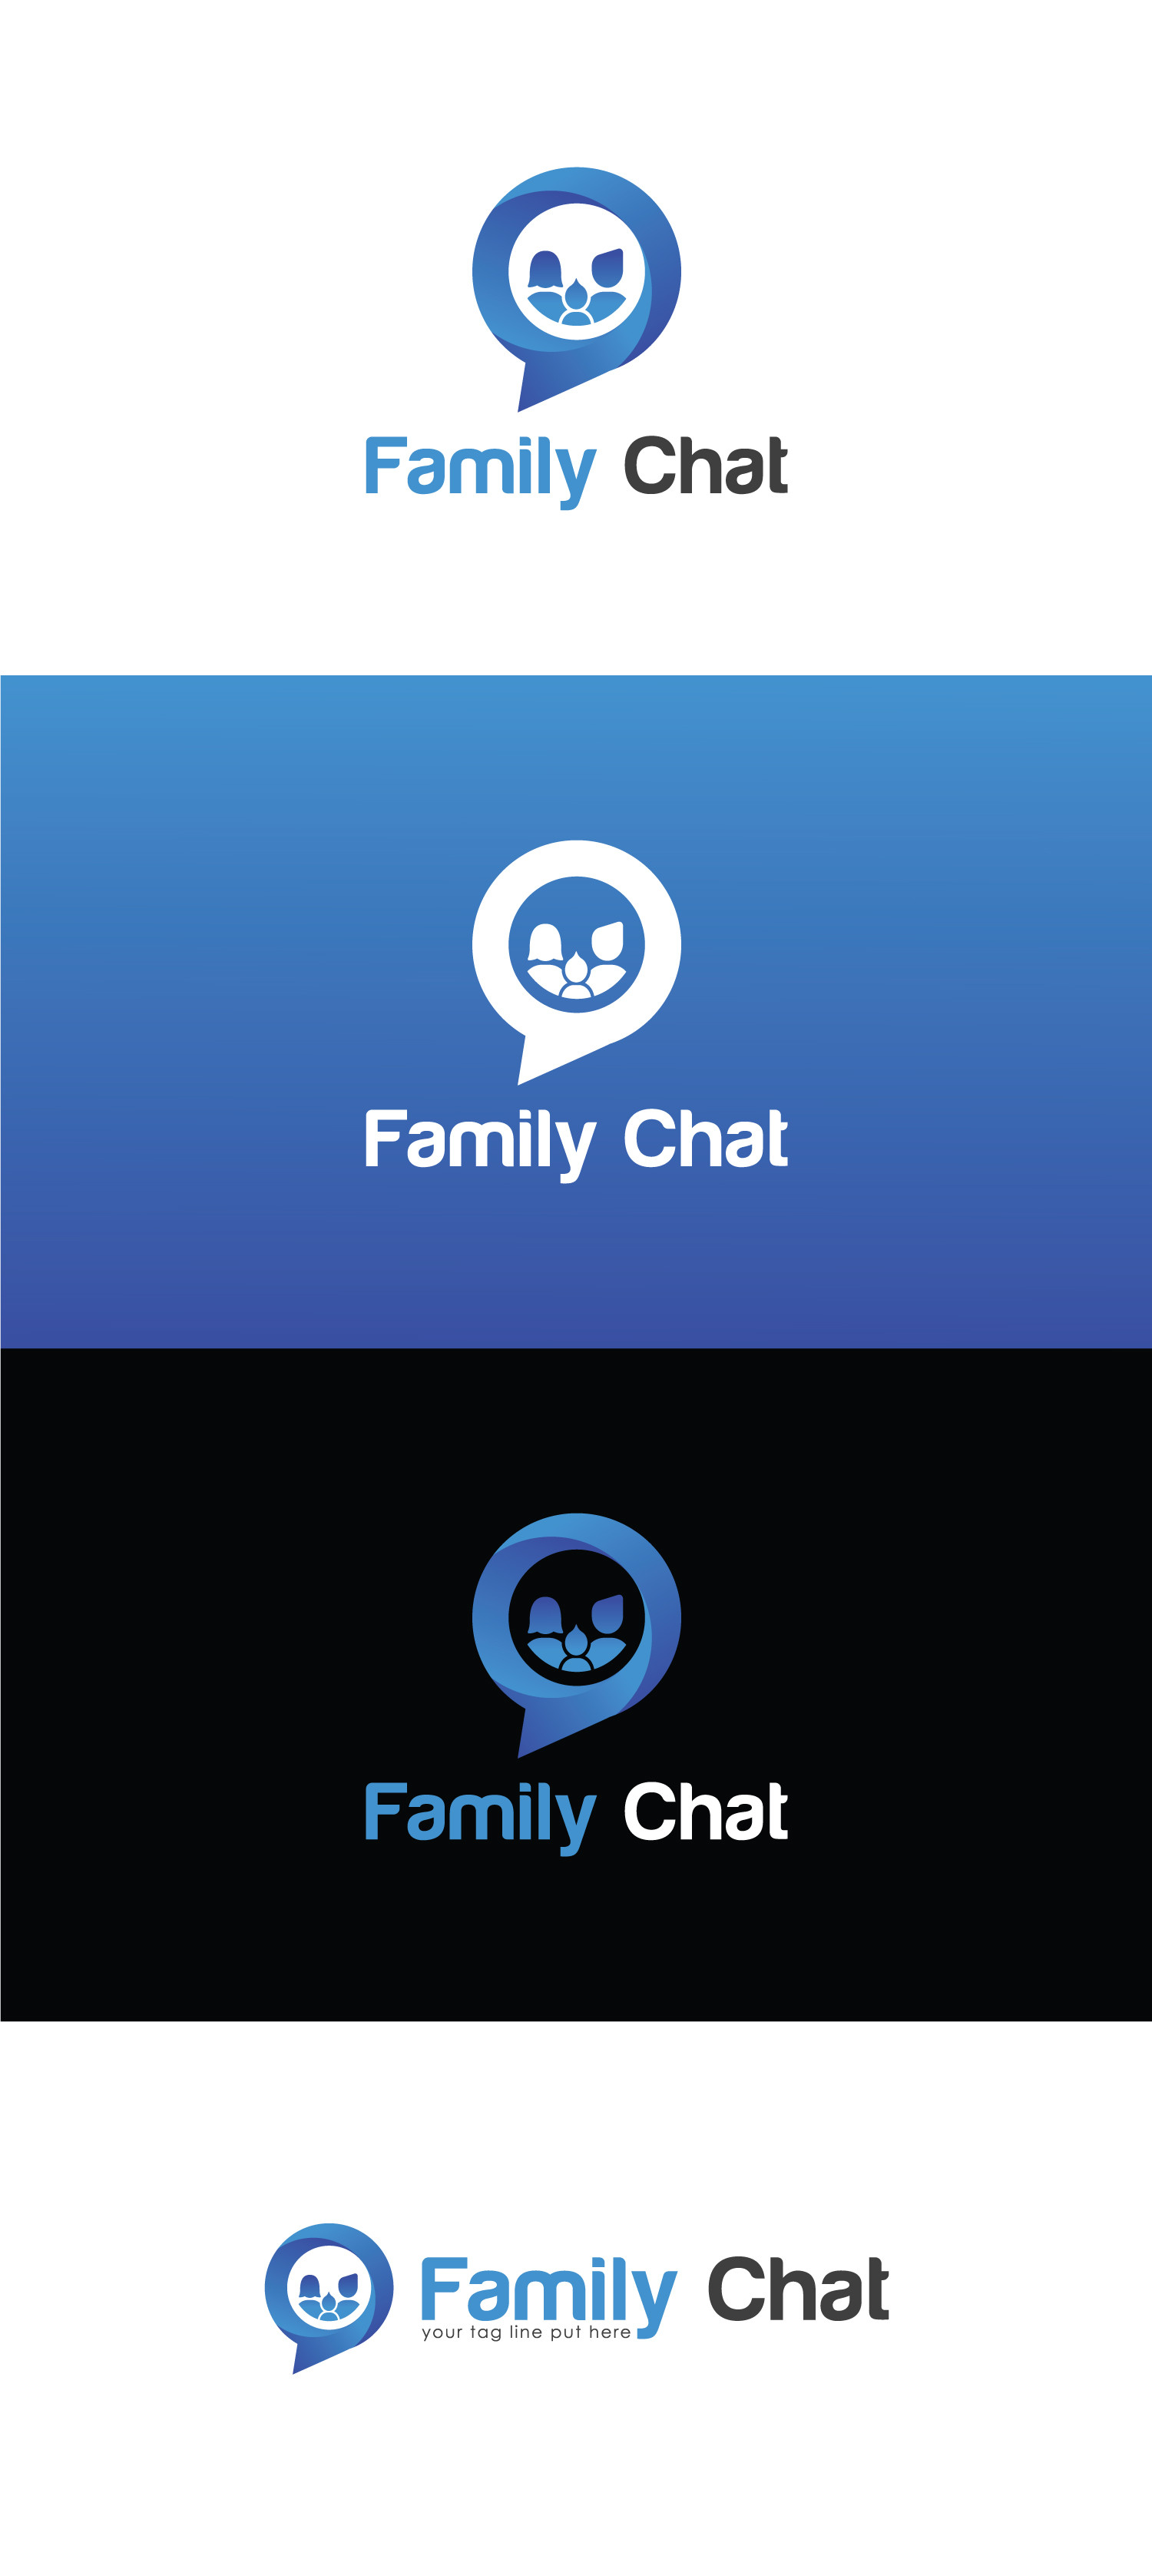 Famy chat